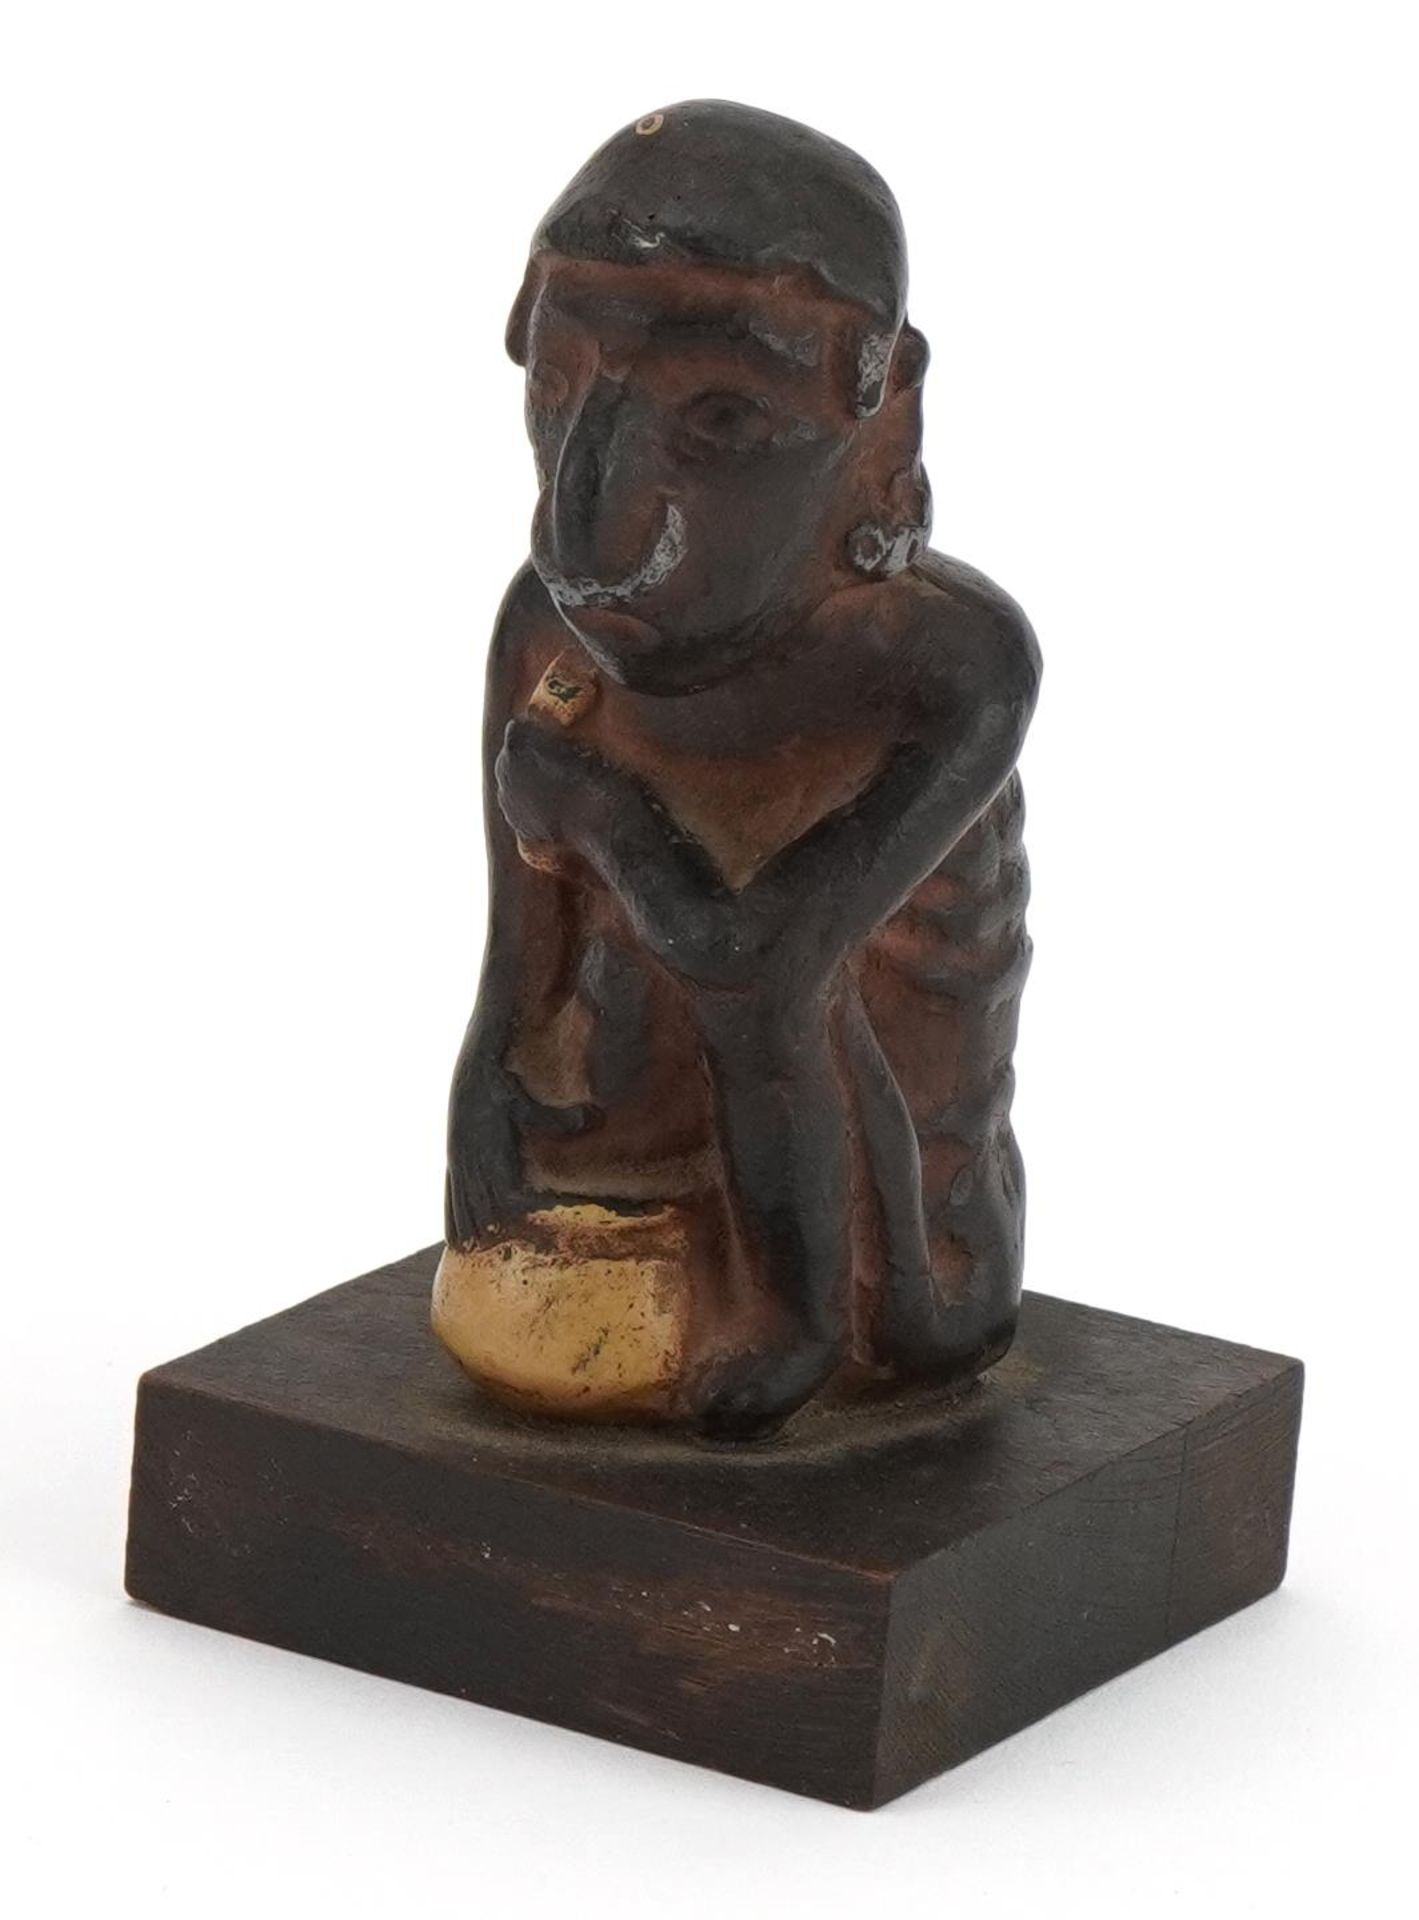 Tribal interest pottery figure of a crouched nude male raised on a wooden square block base, 13cm